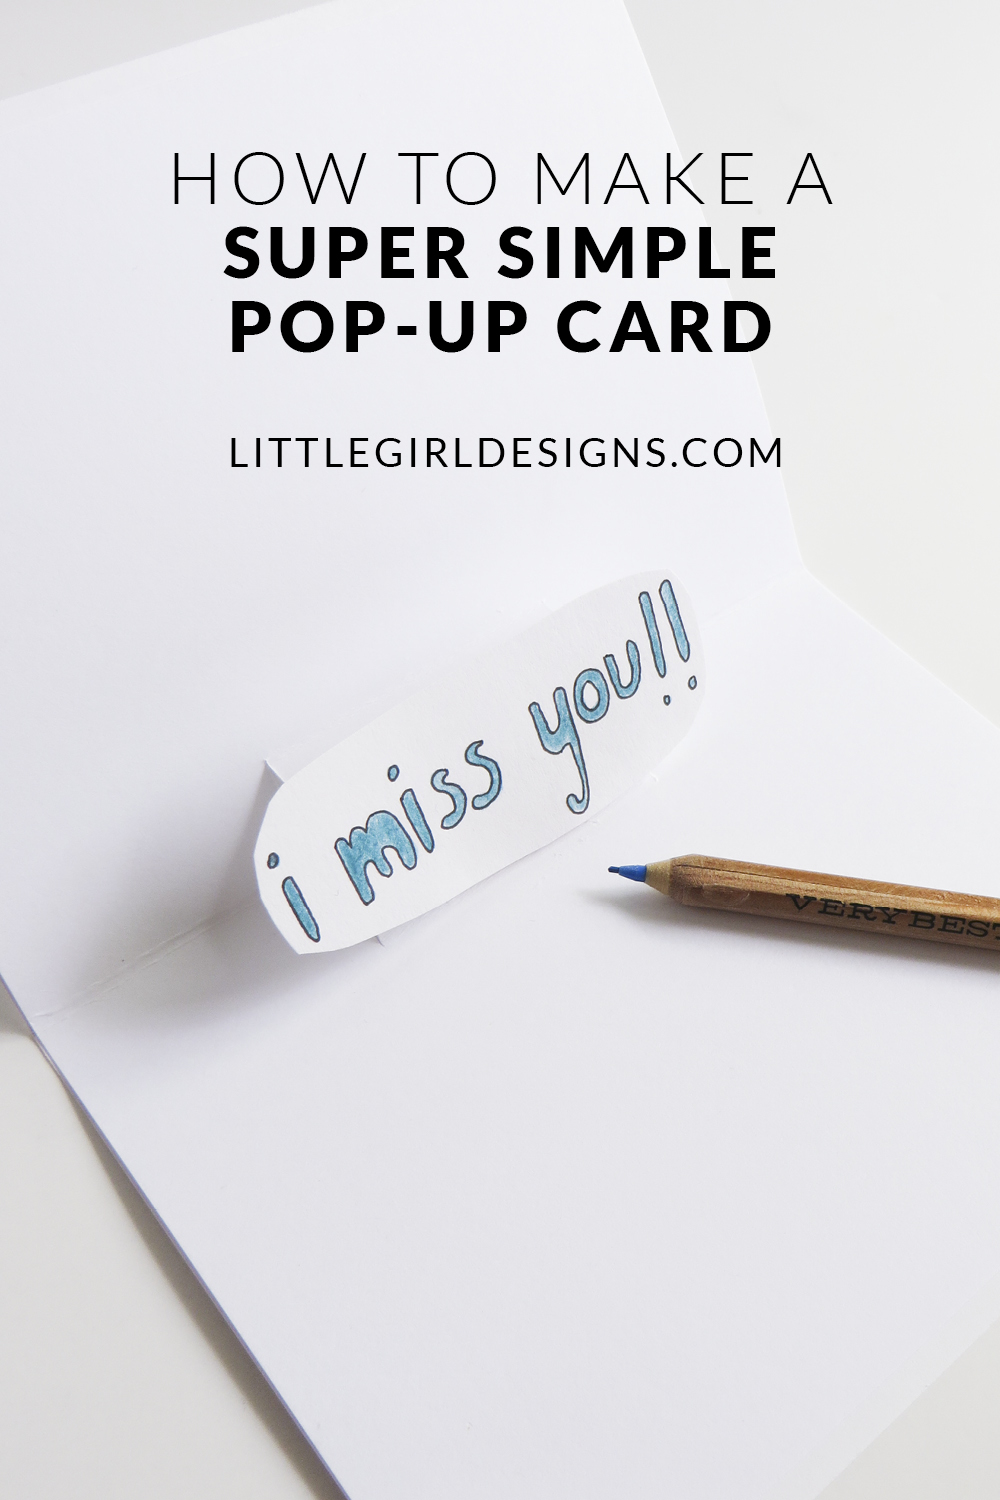 Have you ever wanted to make a pop-up card but they look too difficult? This is a great tutorial on how to make a simple pop up card that takes minimal supplies and skills. And you'll love the cute result!